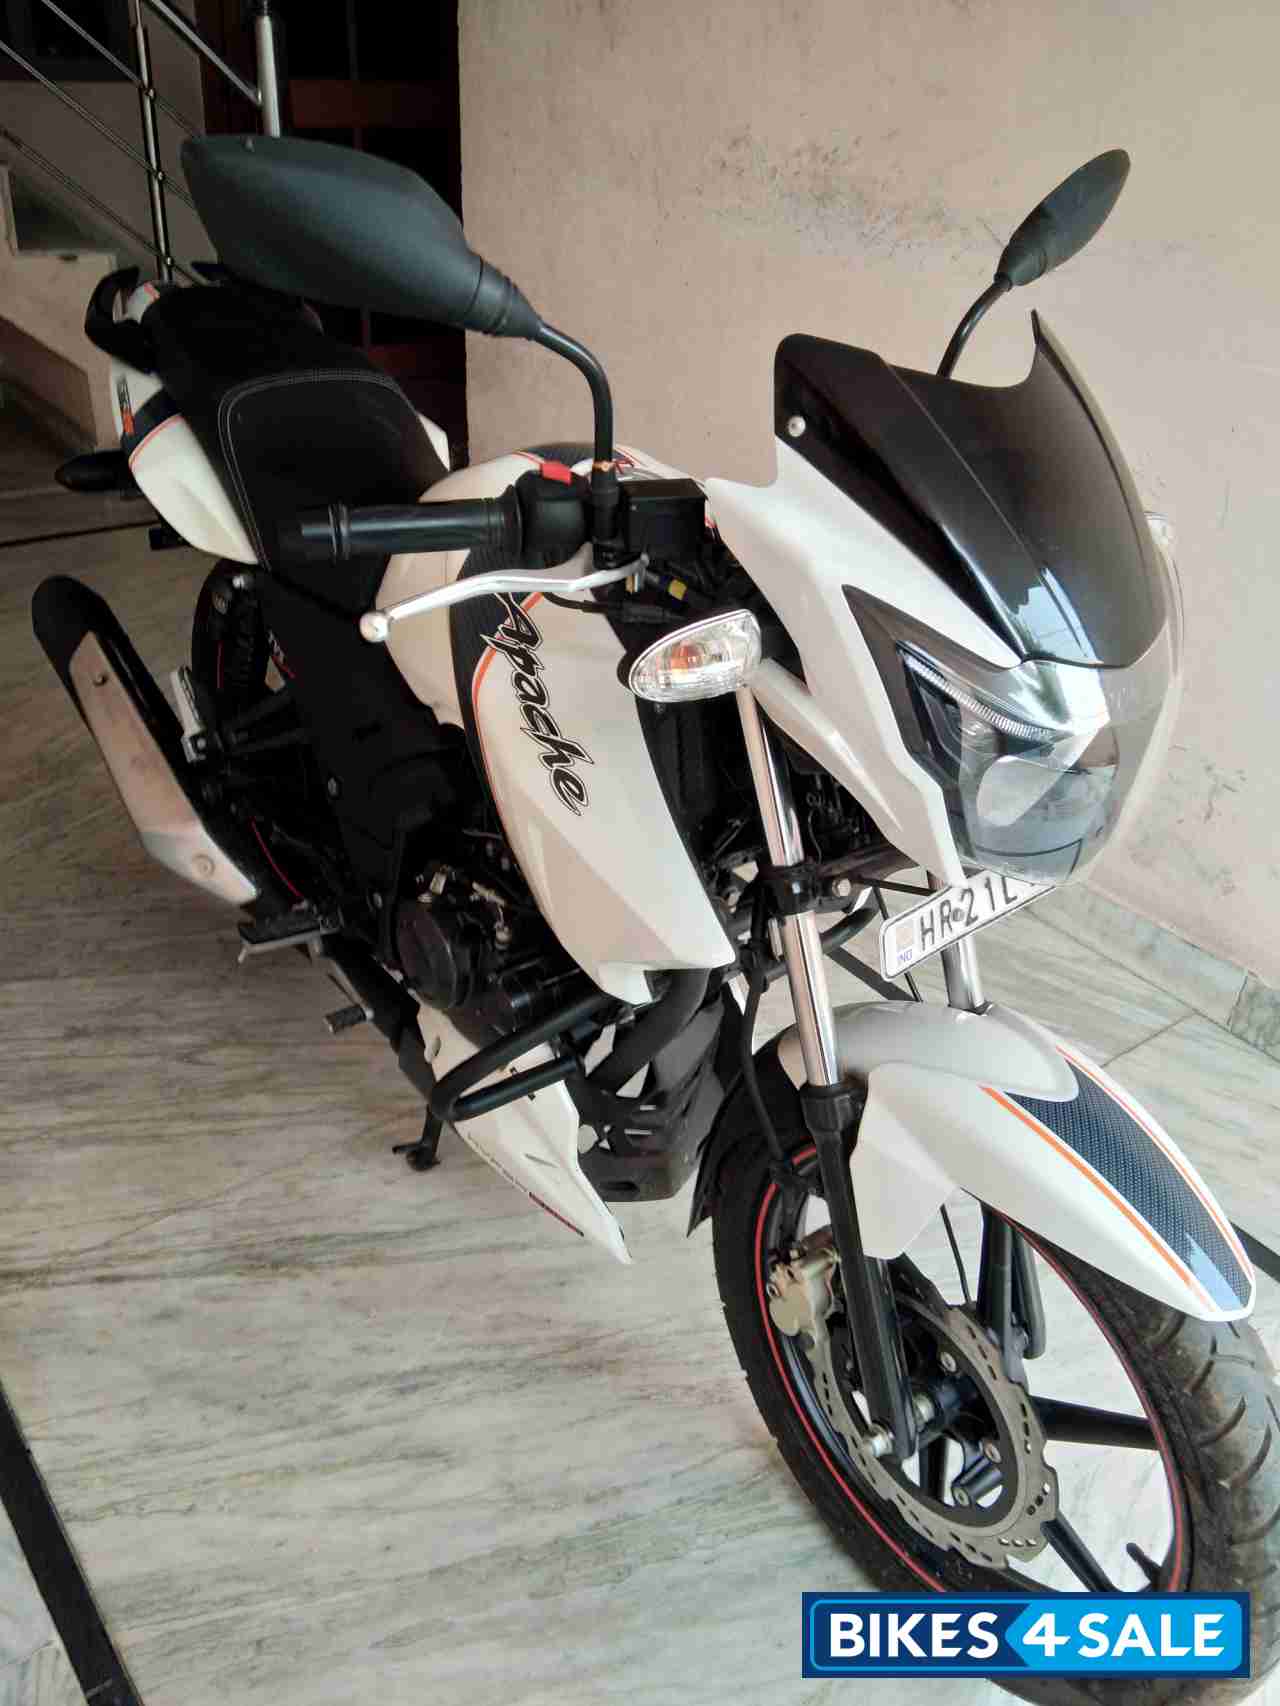 Used 2017 Model Tvs Apache Rtr 160 For Sale In Hisar Id 169457